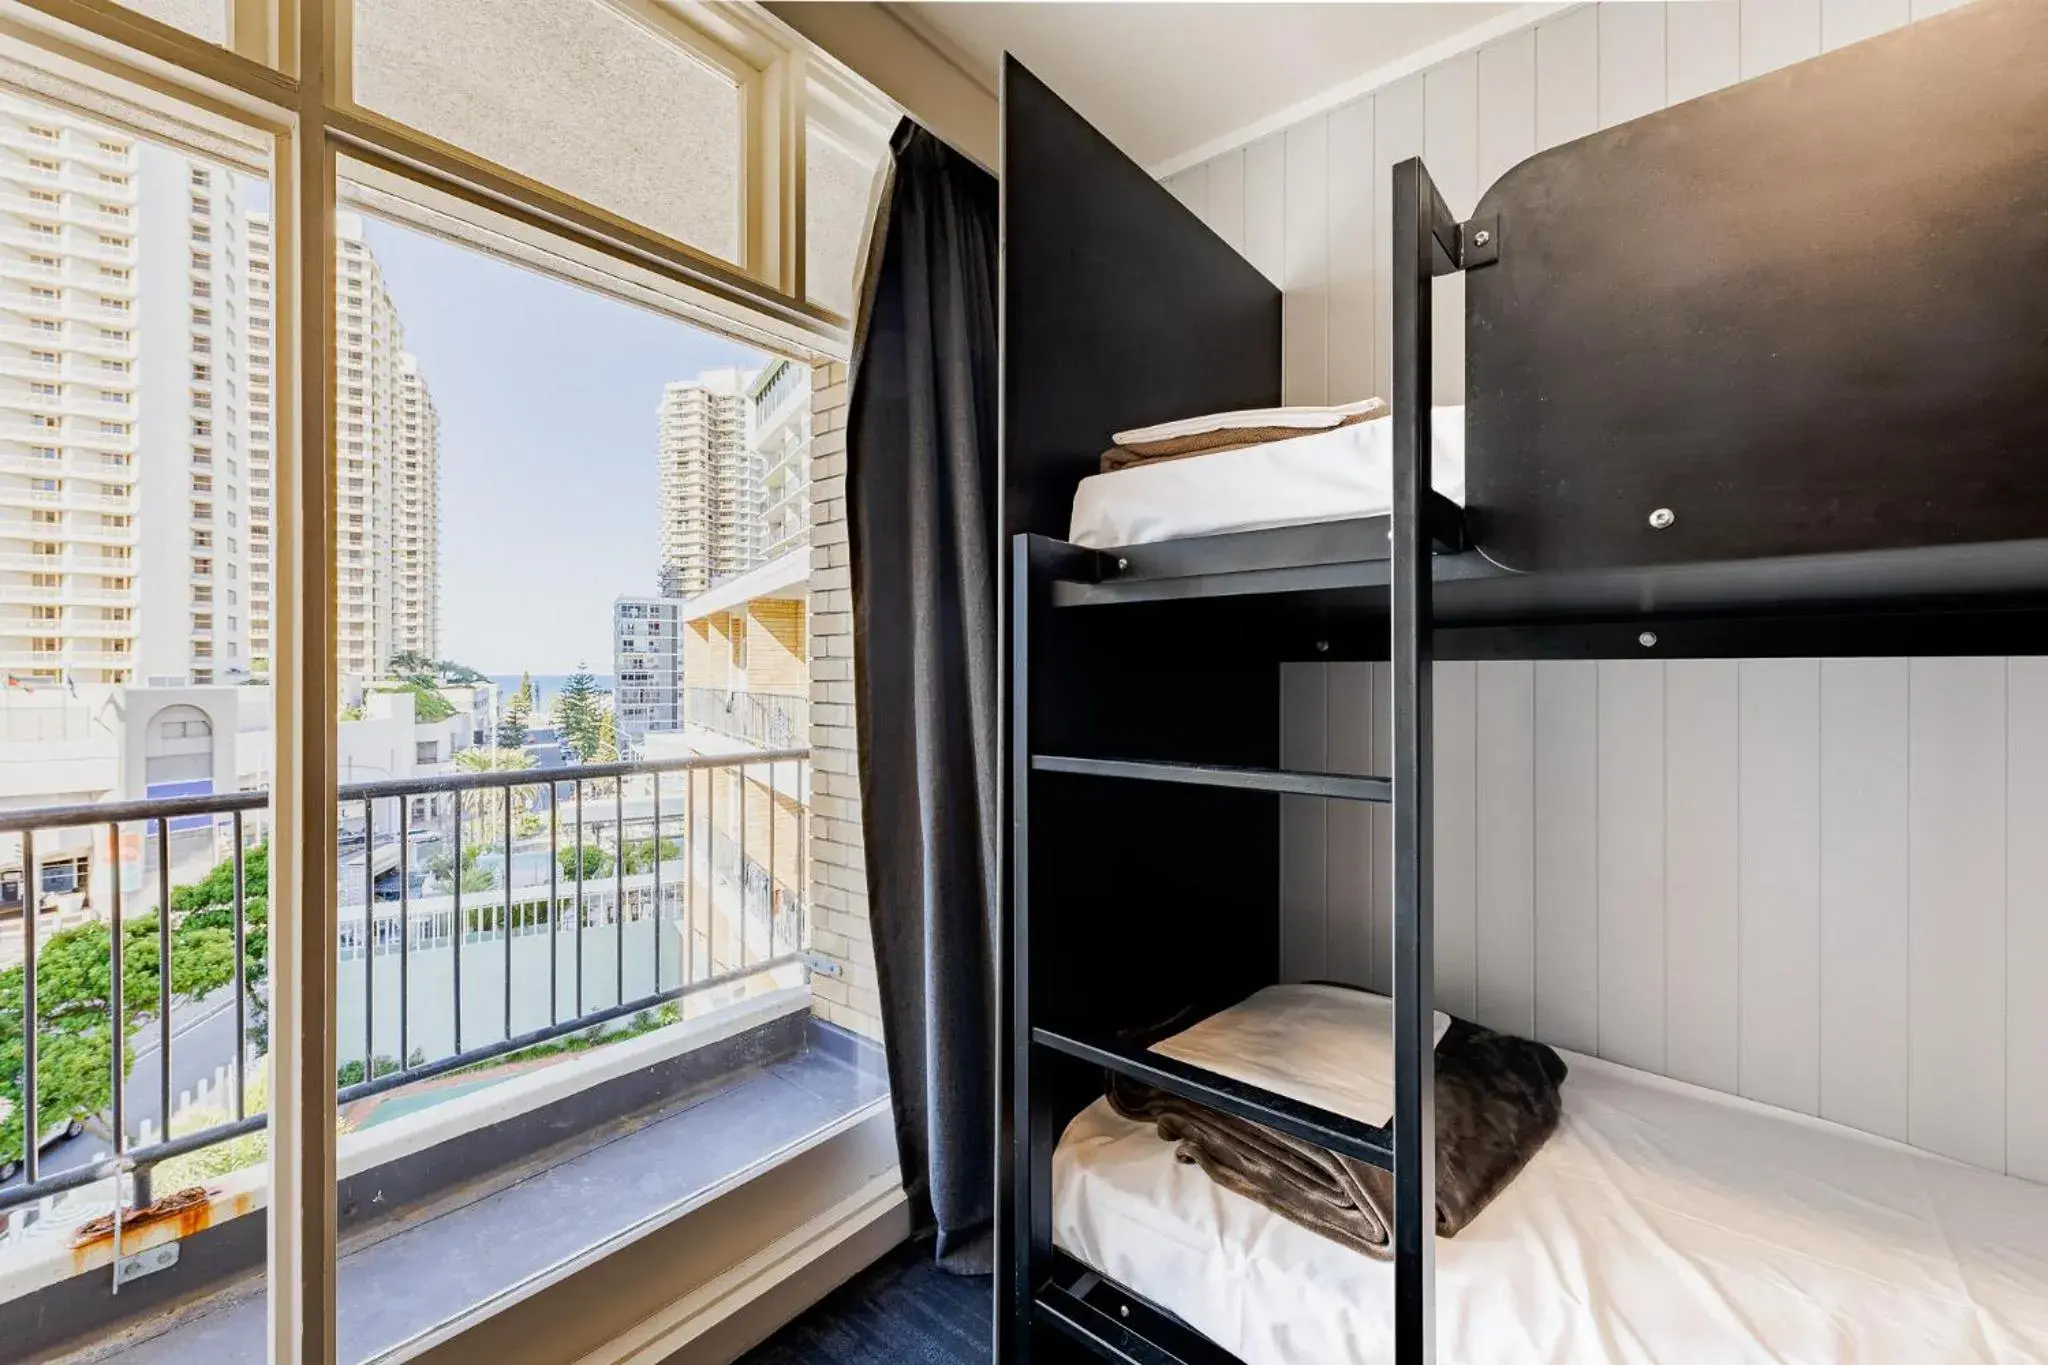 Bed in Bunk Surfers Paradise